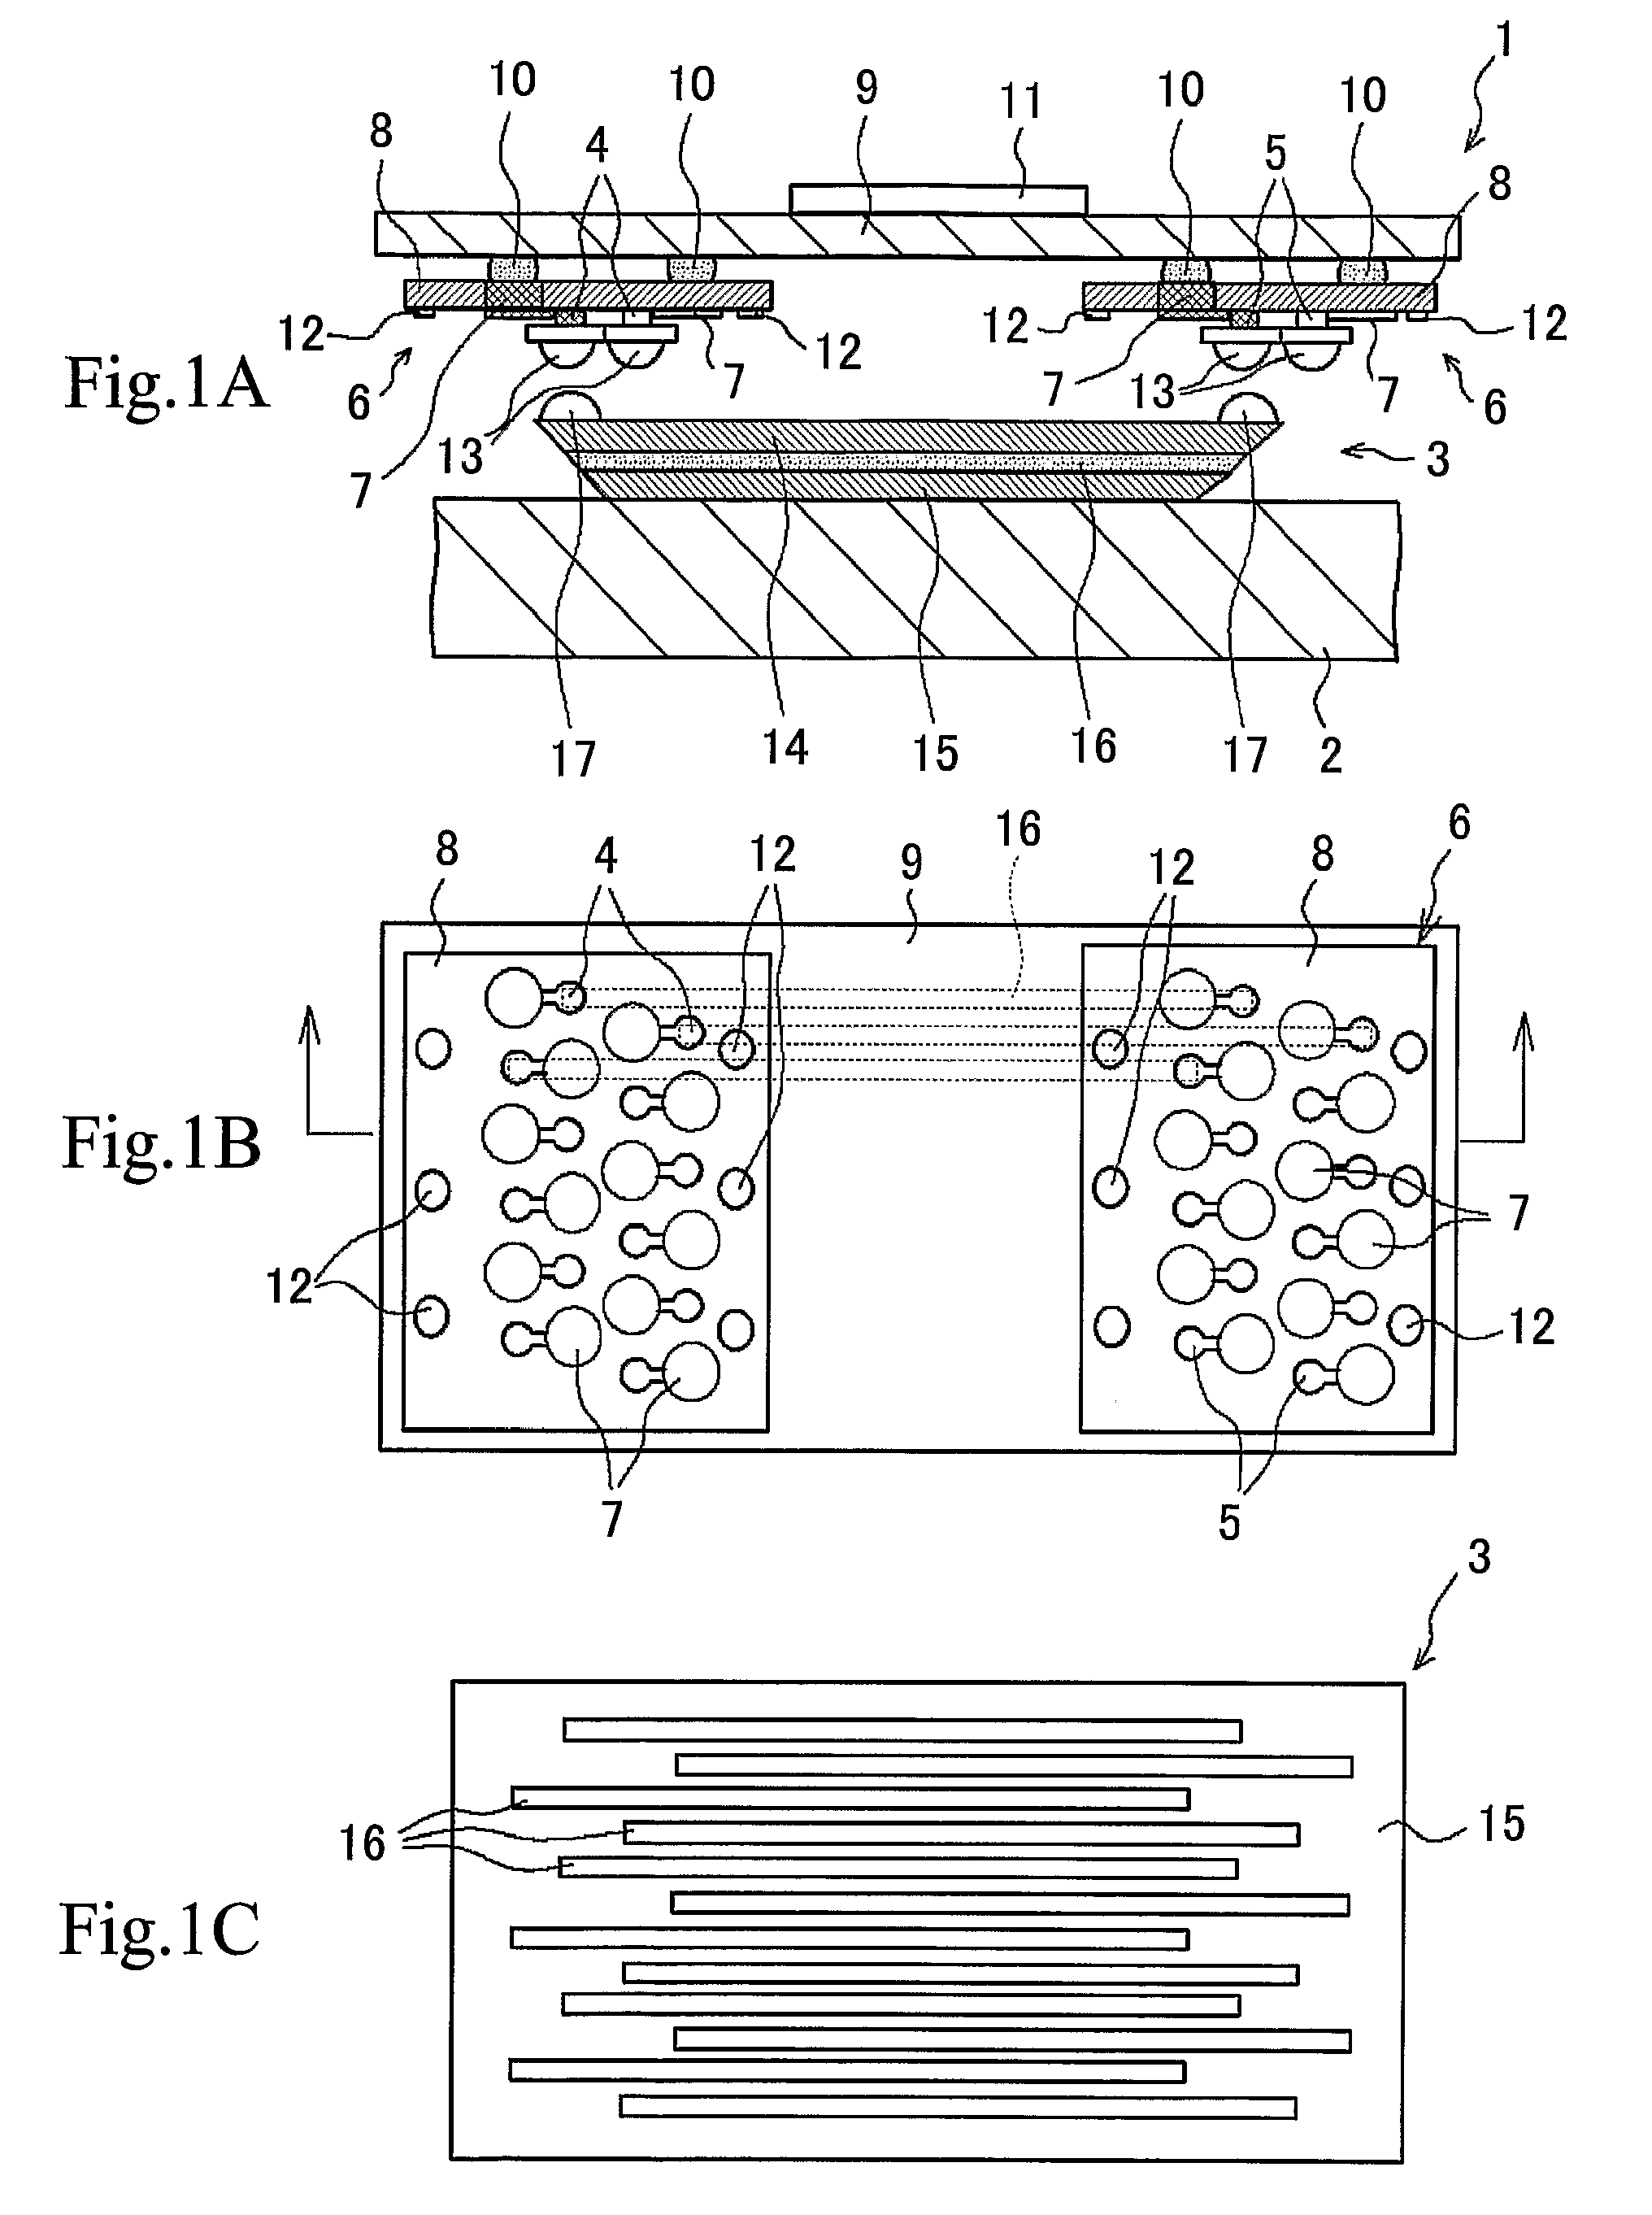 Photo-electric conversion apparatus with alternating photoelectric conversion elements